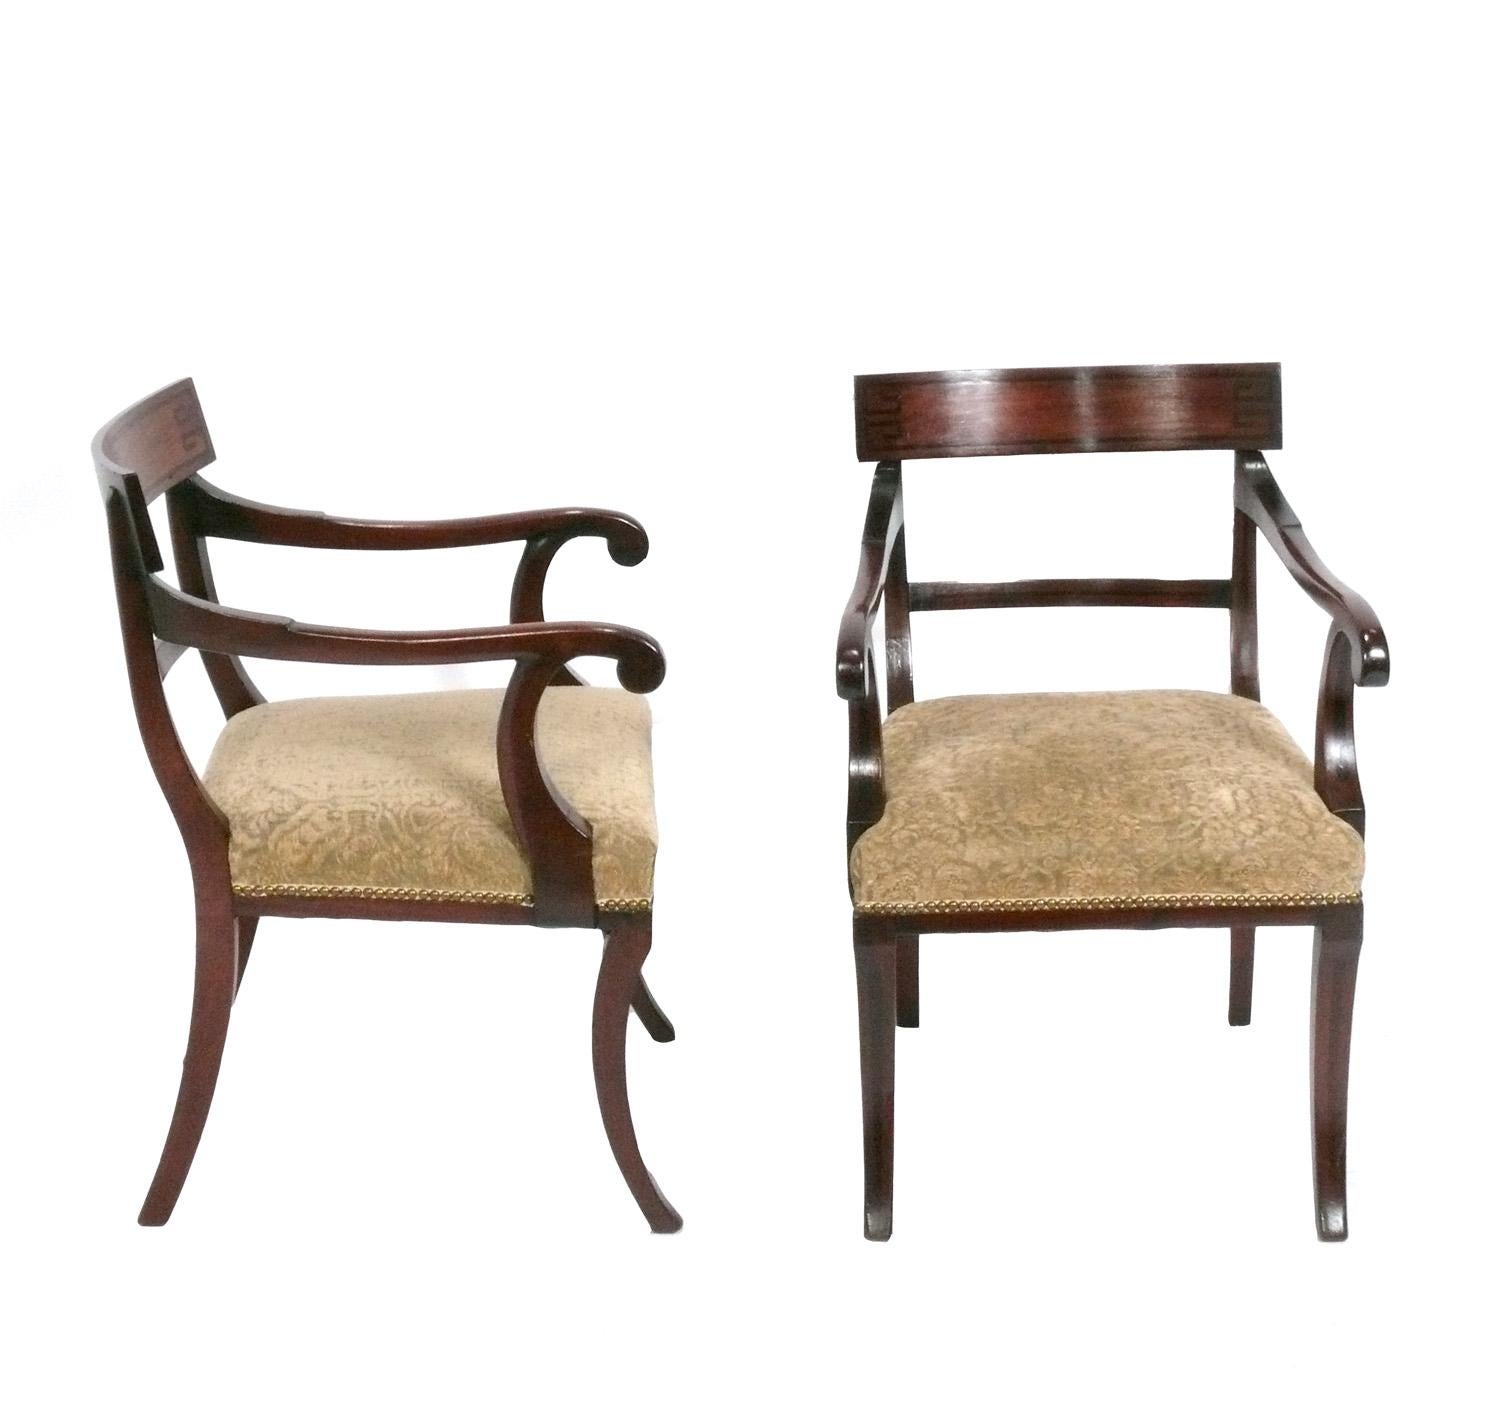 Set of Eight Elegant Klismos Dining Chairs, probably English, circa 1960s, possibly earlier. Removed from an apartment at 720 Park Avenue, NY, NY. The arm chairs measure 33